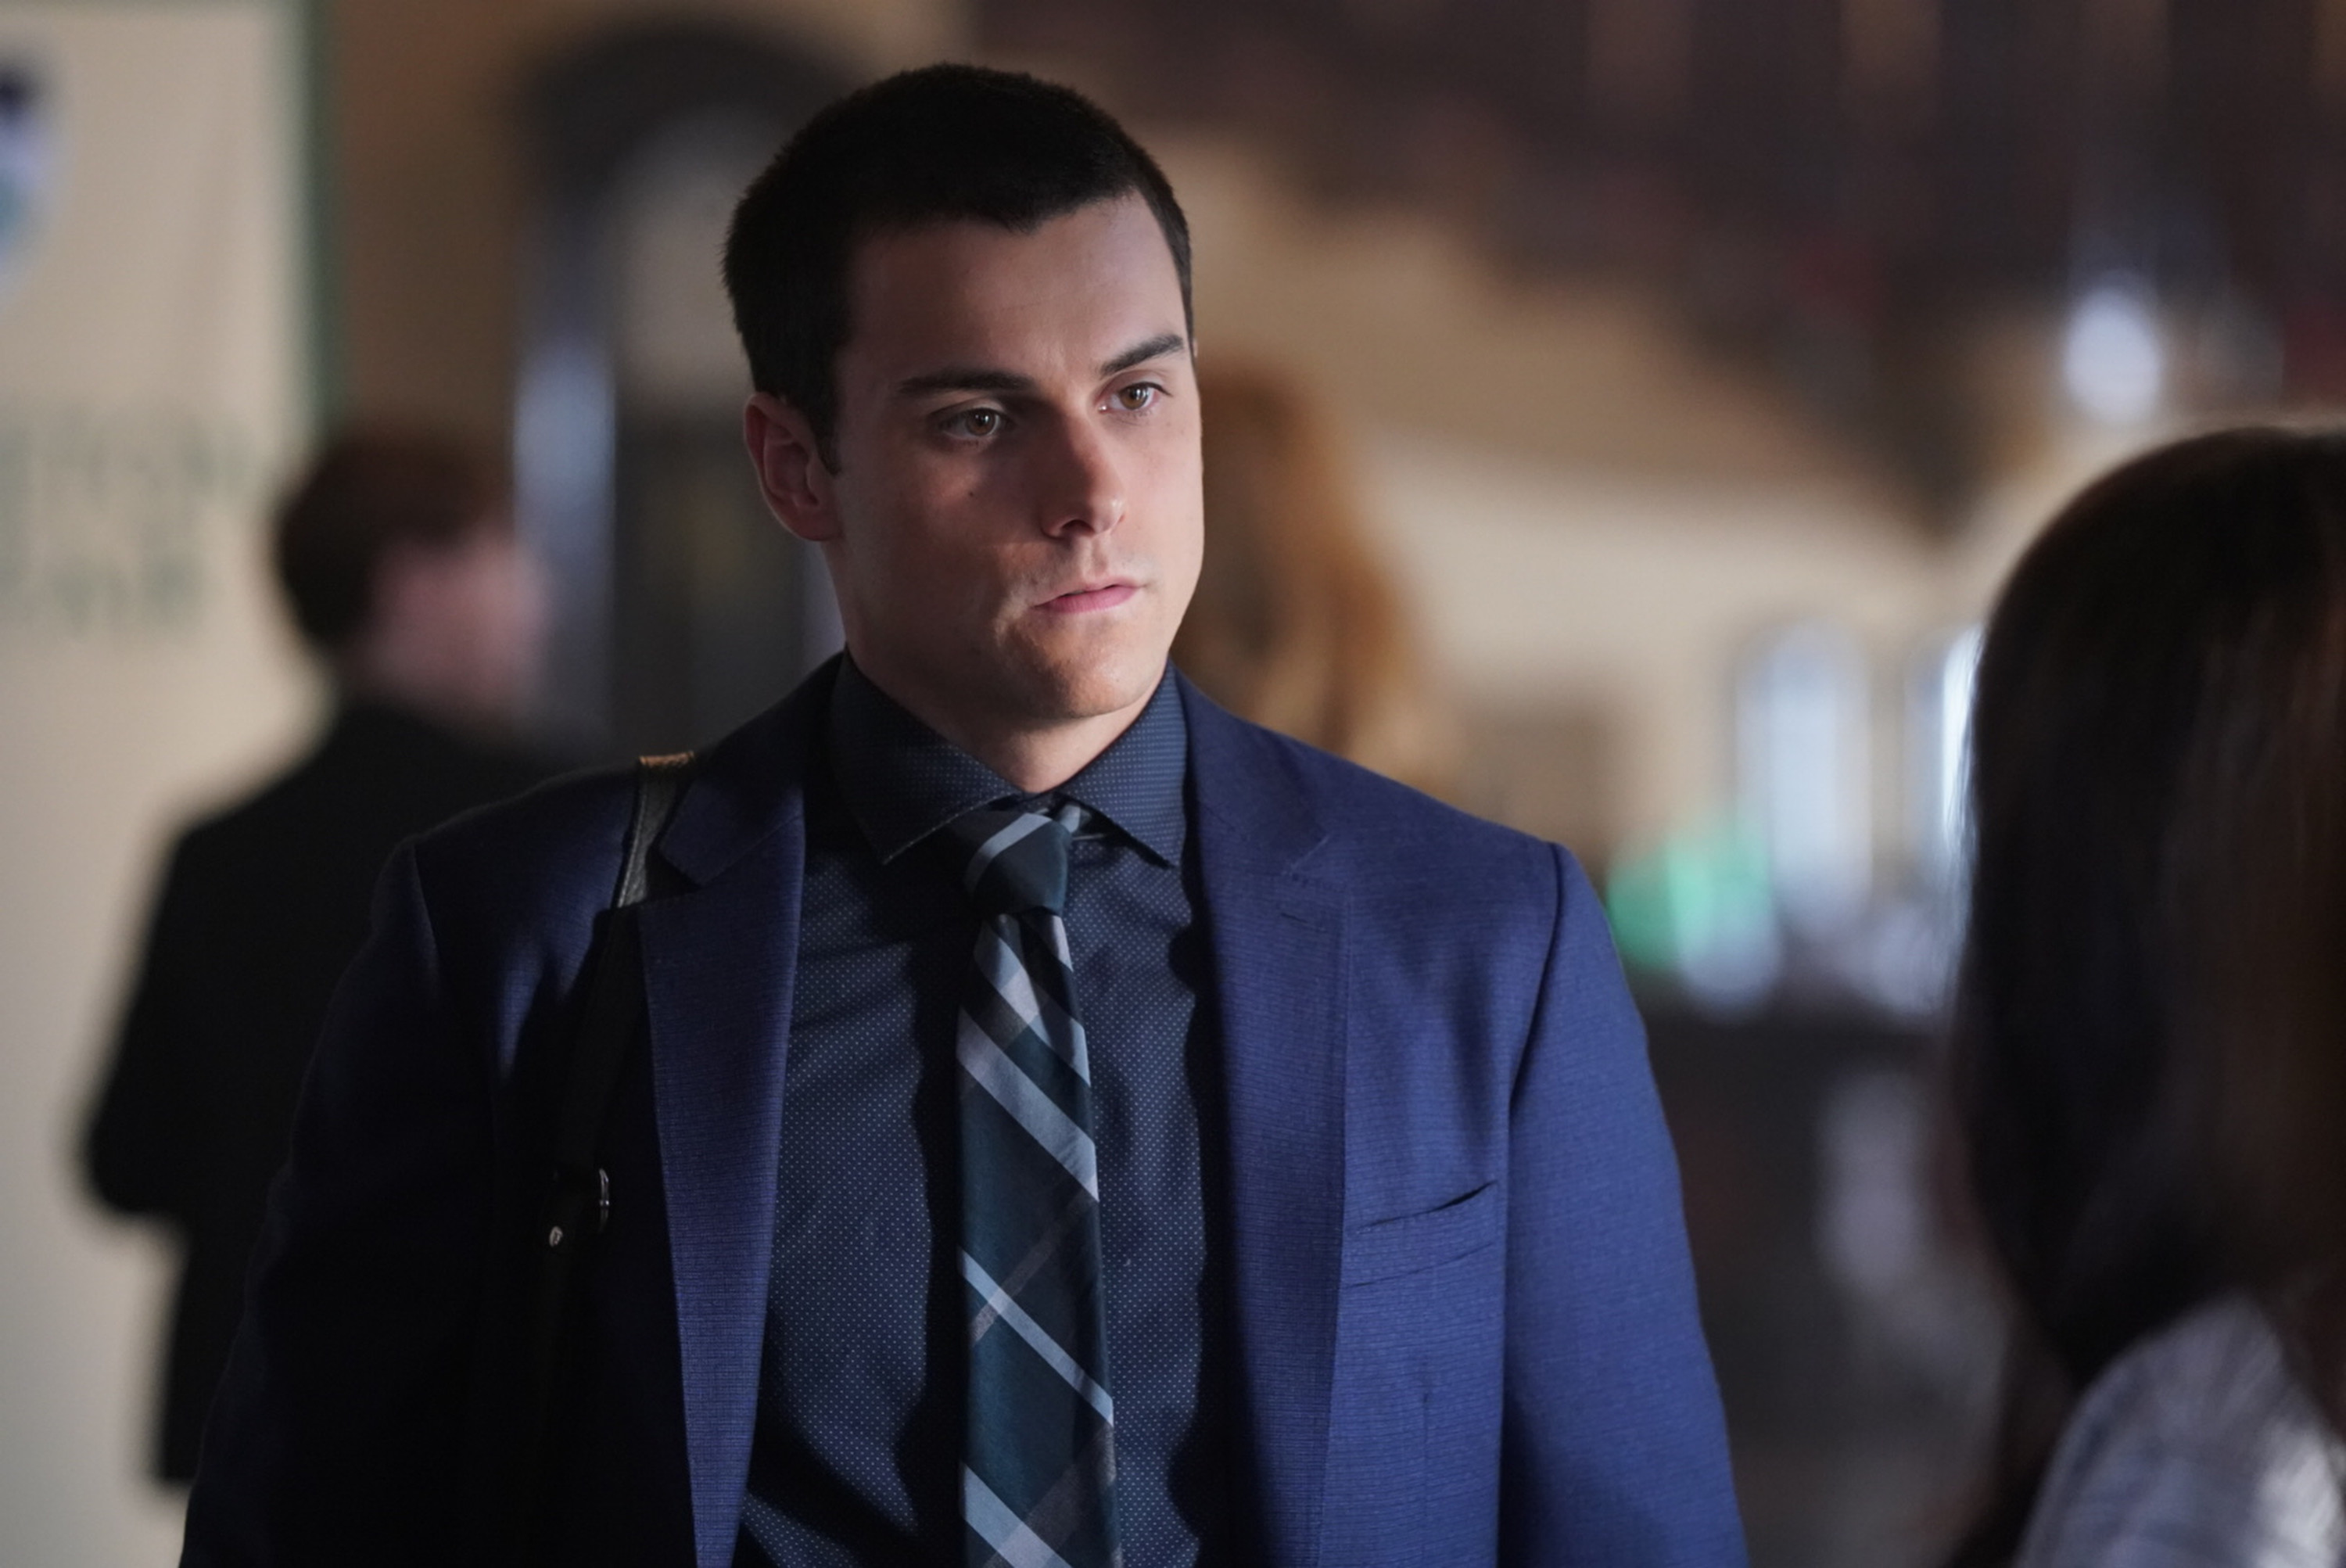 HOW TO GET AWAY WITH MURDER Episode 4.02 "I'm Not Her"